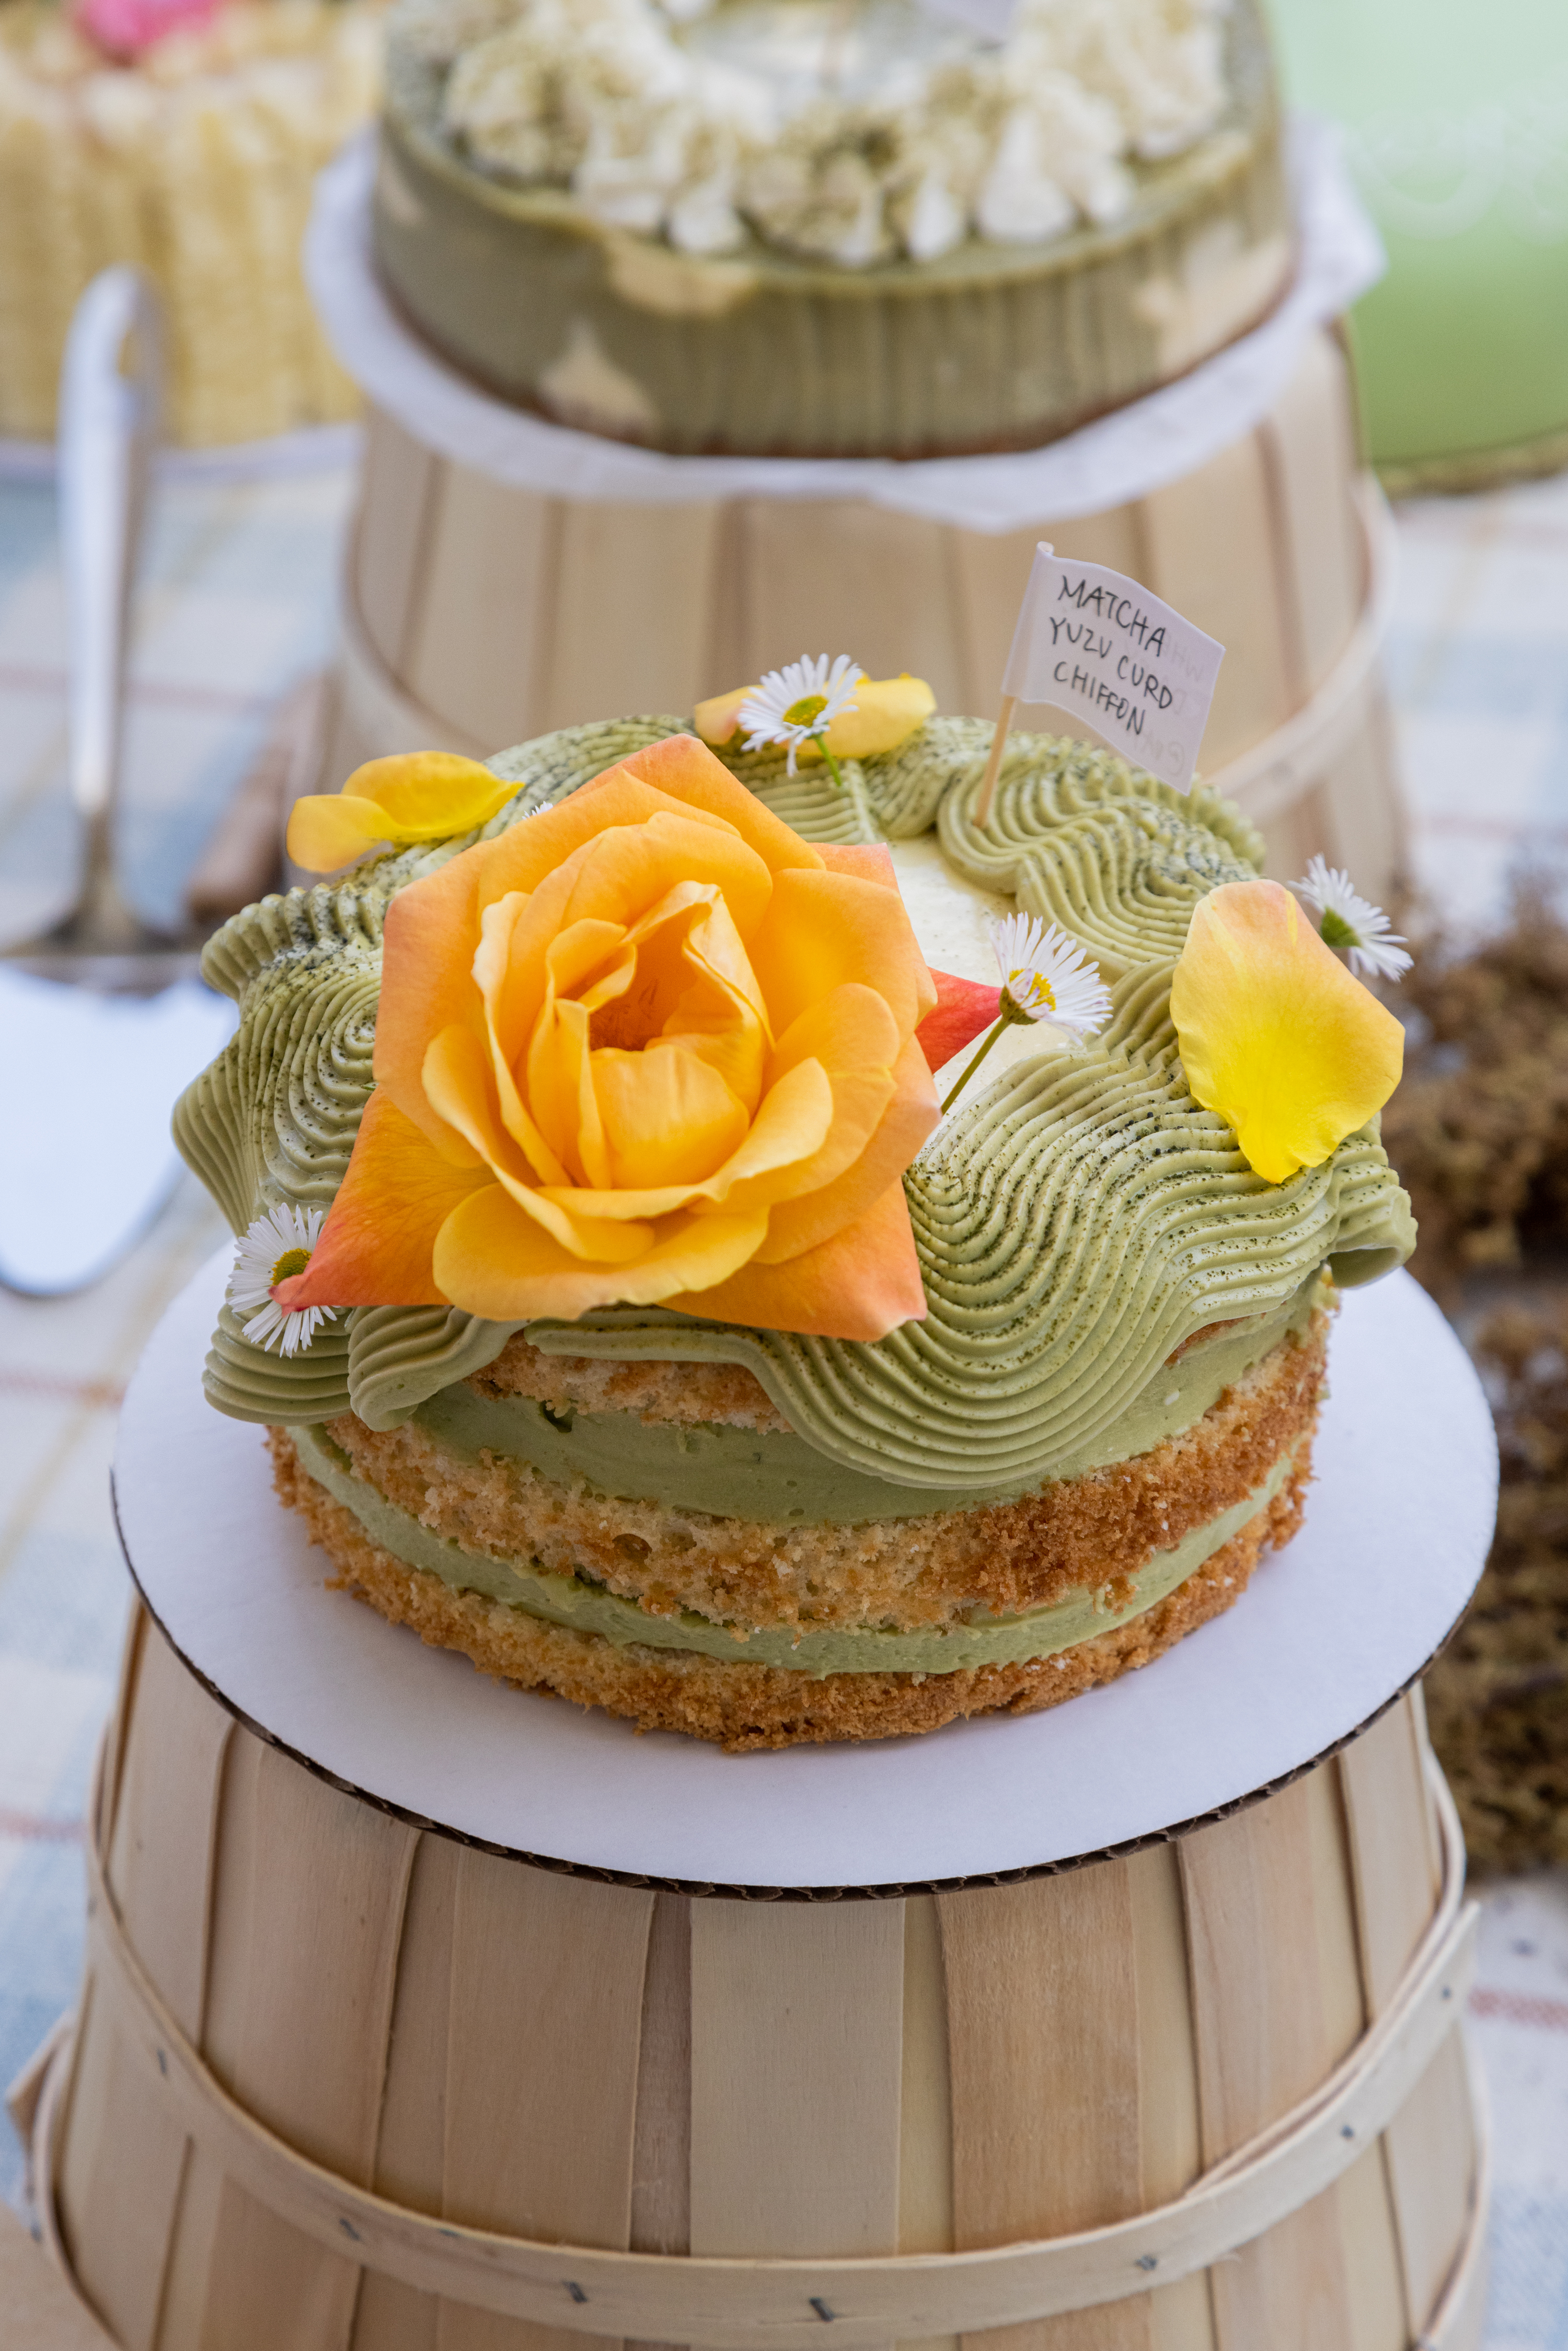 A matcha cake with a vibrant orange rose on top sits on a wooden stand, surrounded by other pastries.